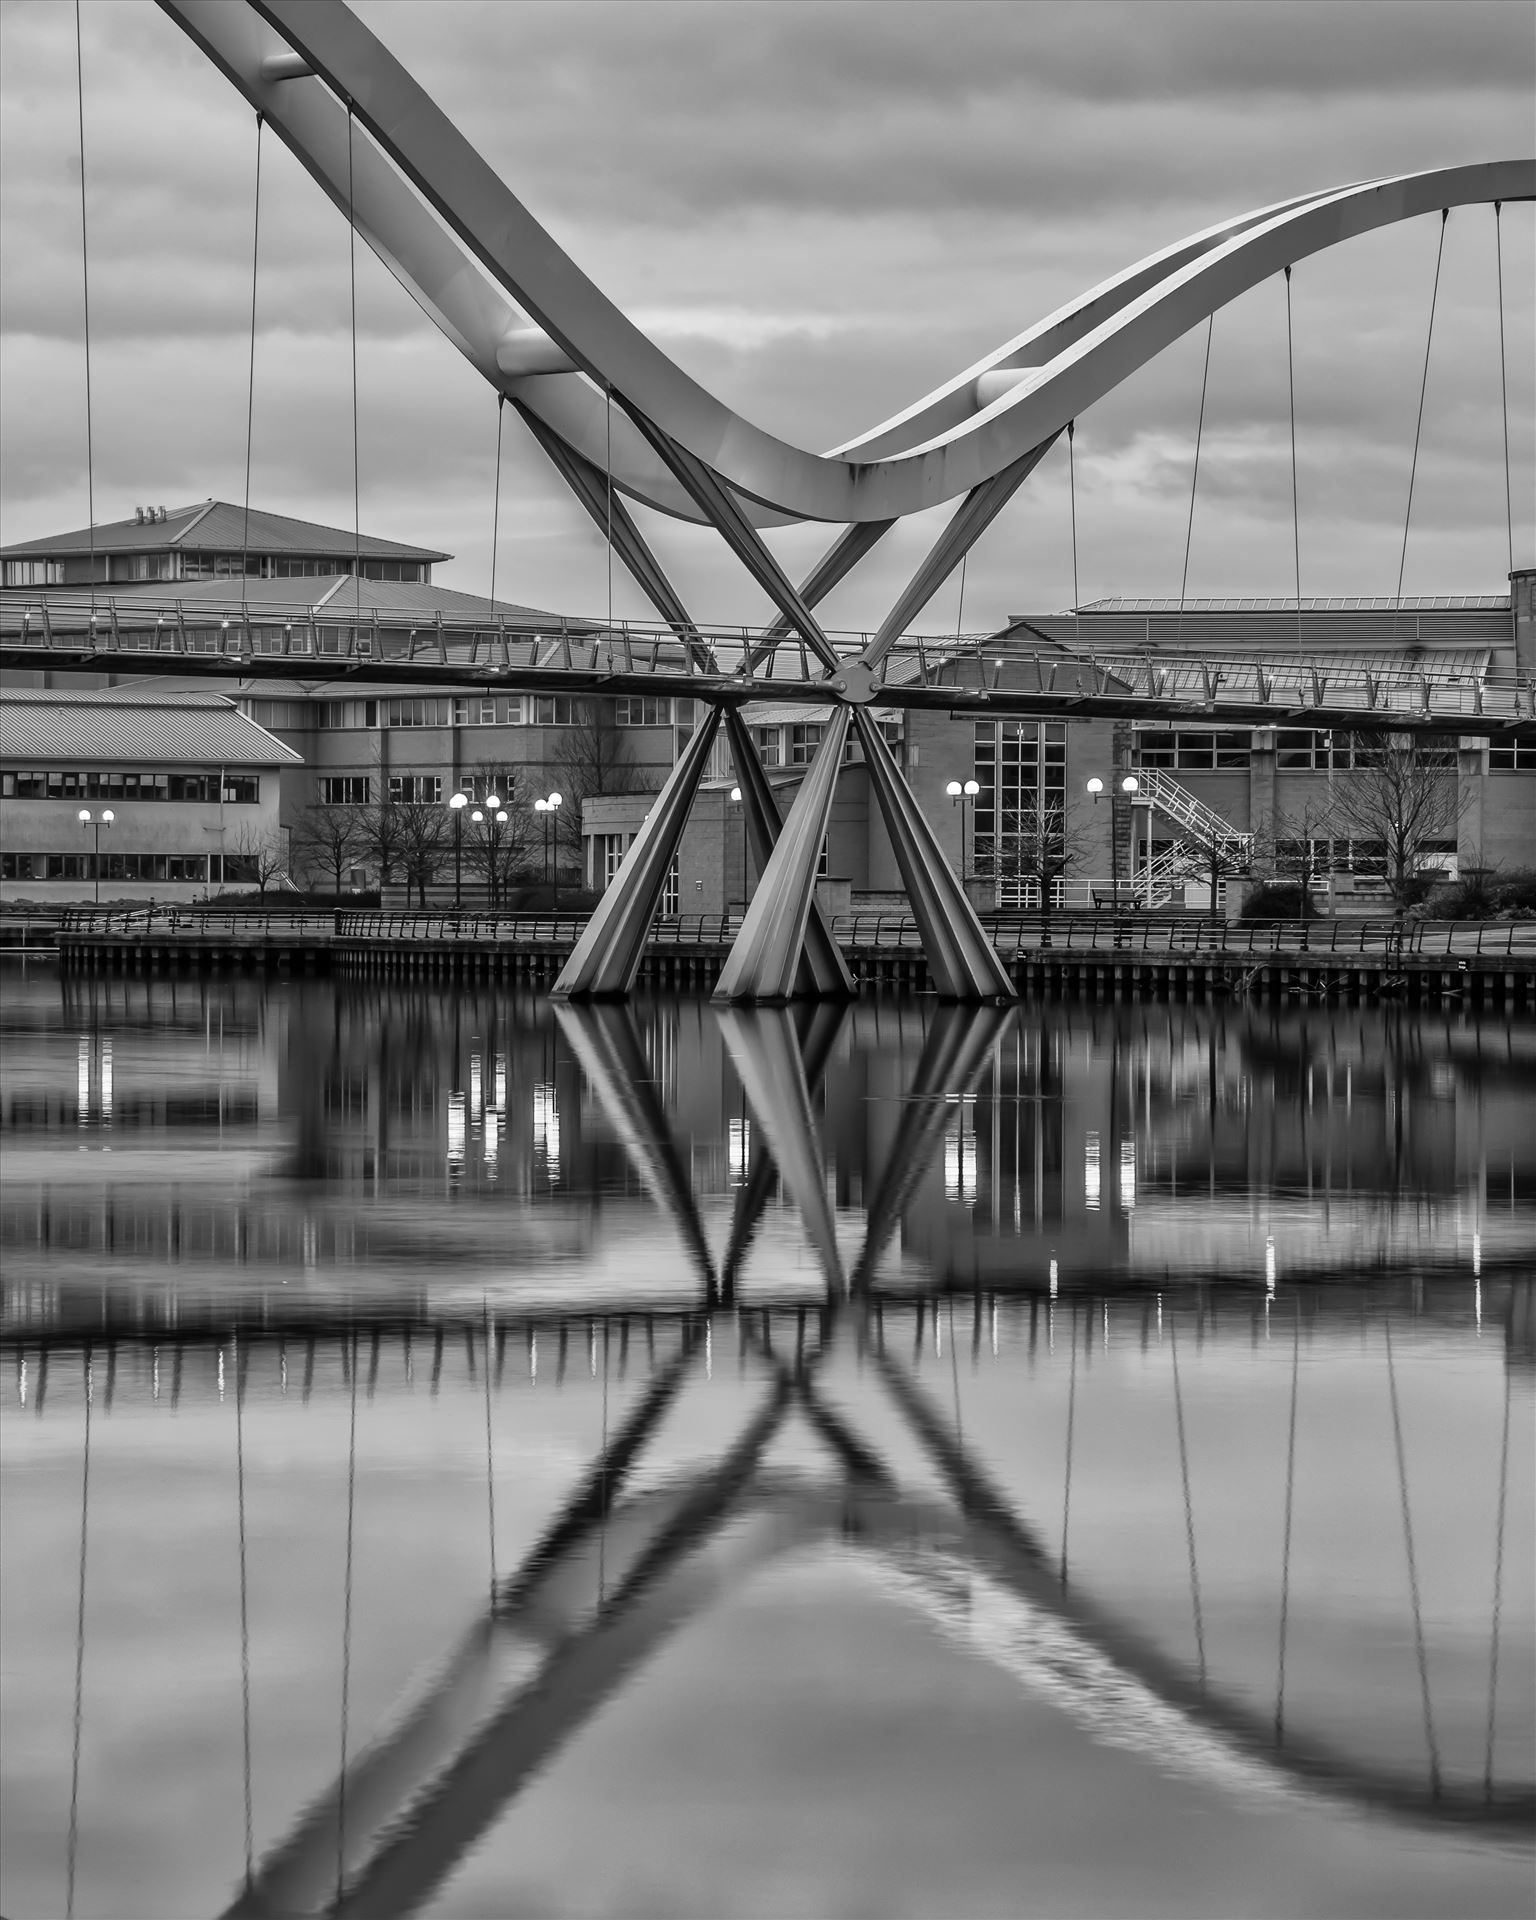 The Infinity Bridge 02 - The Infinity Bridge is a public pedestrian and cycle footbridge across the River Tees that was officially opened on 14 May 2009 at a cost of £15 million. by philreay